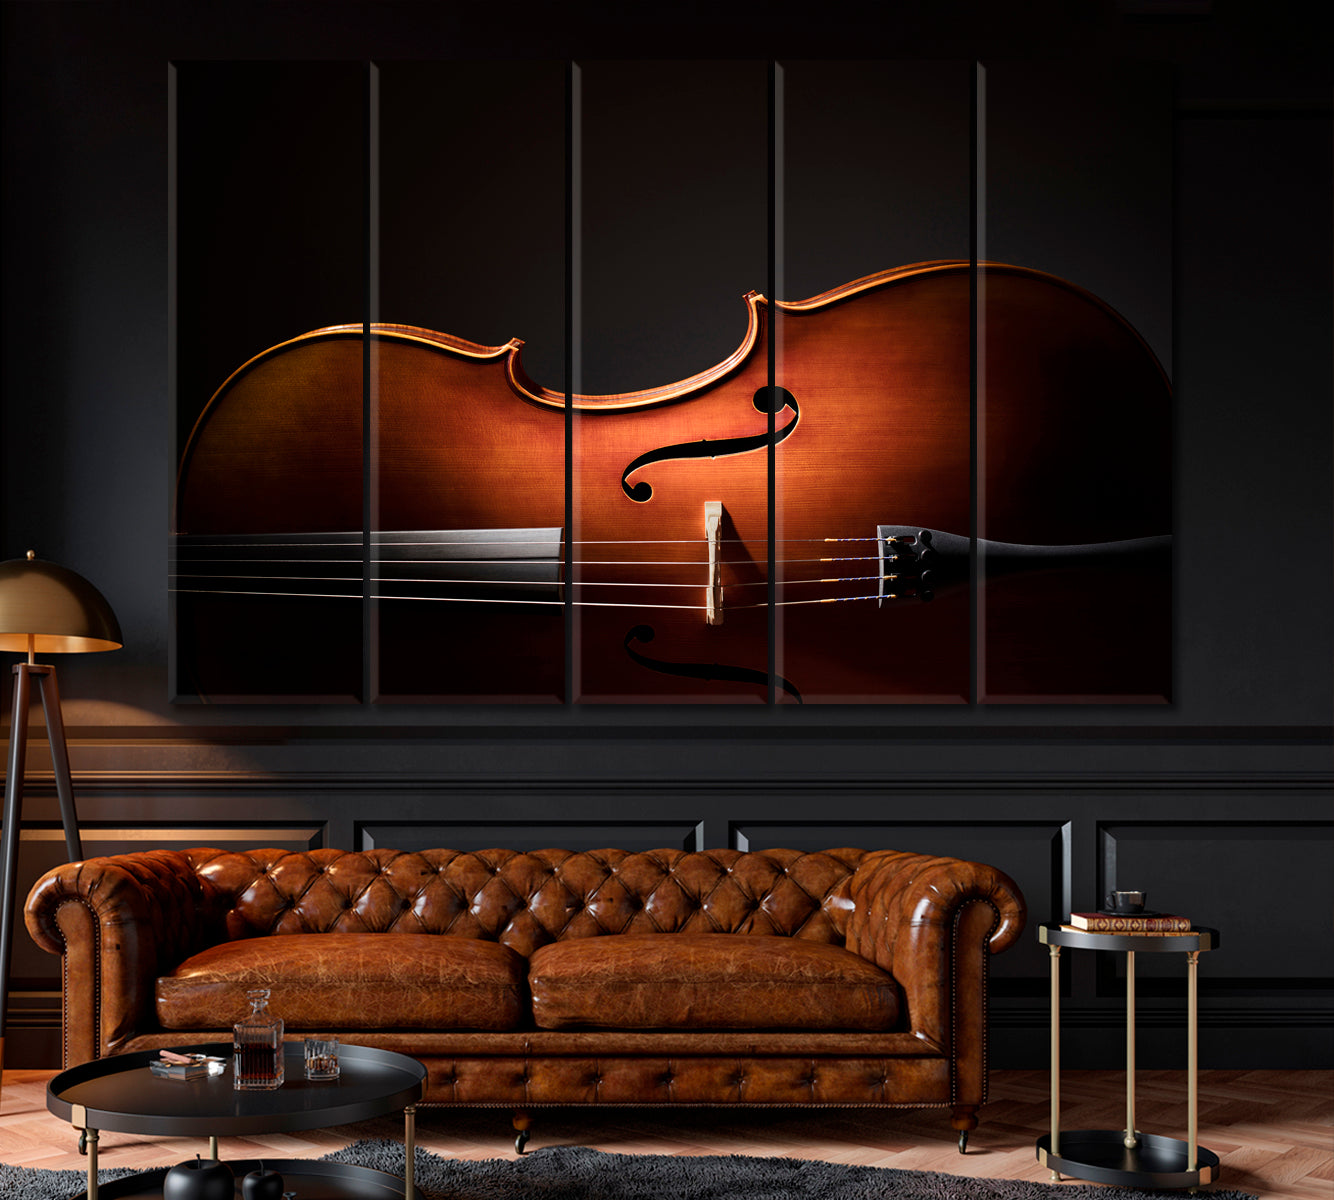 Silhouette of Cello Canvas Print ArtLexy 5 Panels 36"x24" inches 